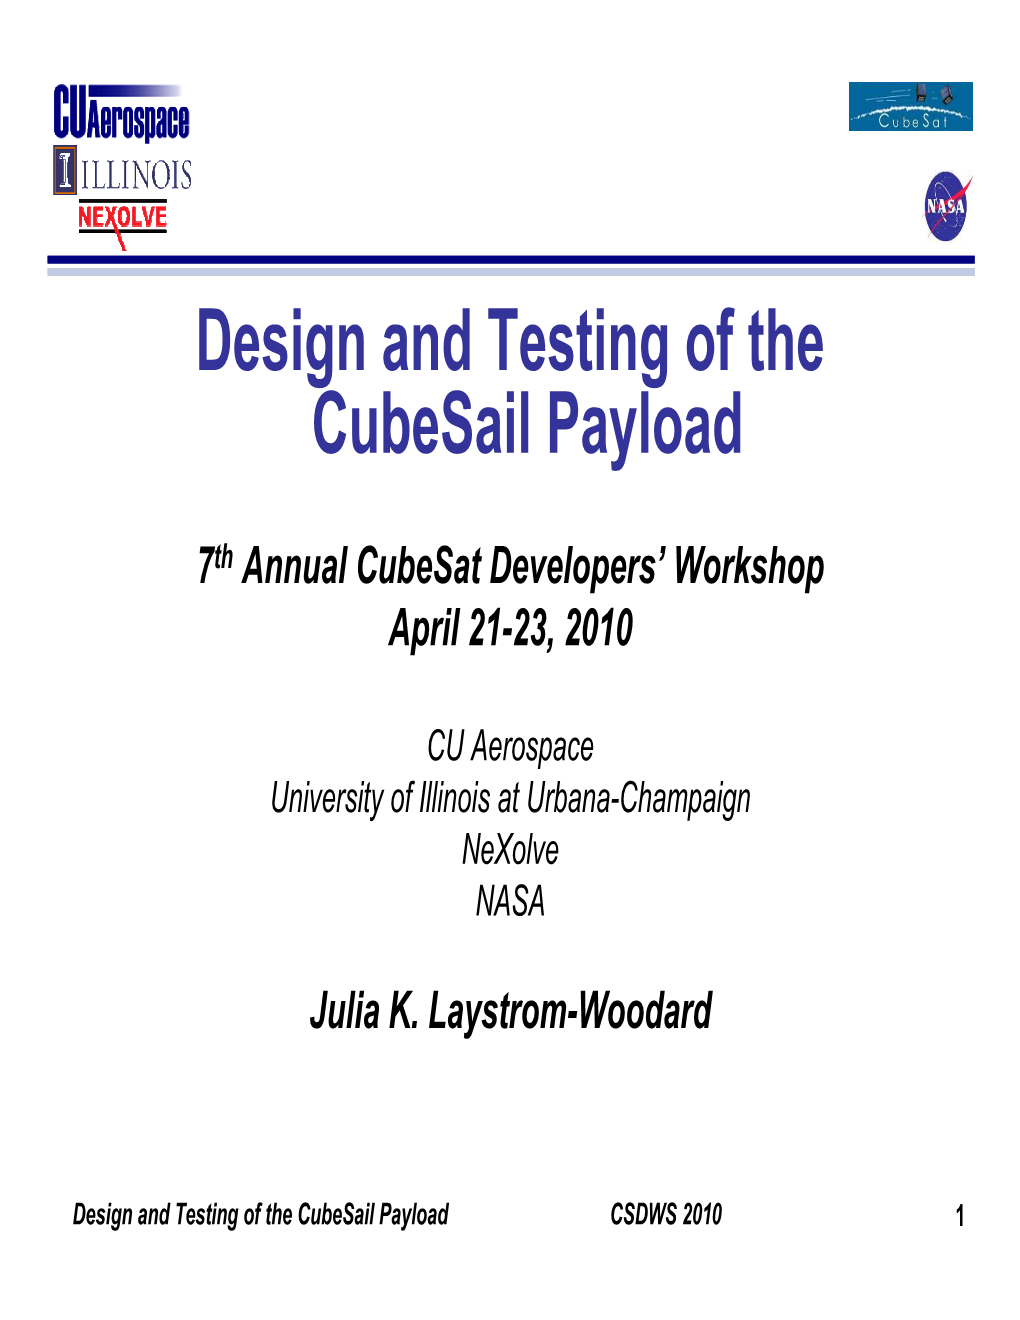 Design and Testing of the Cubesail Payload